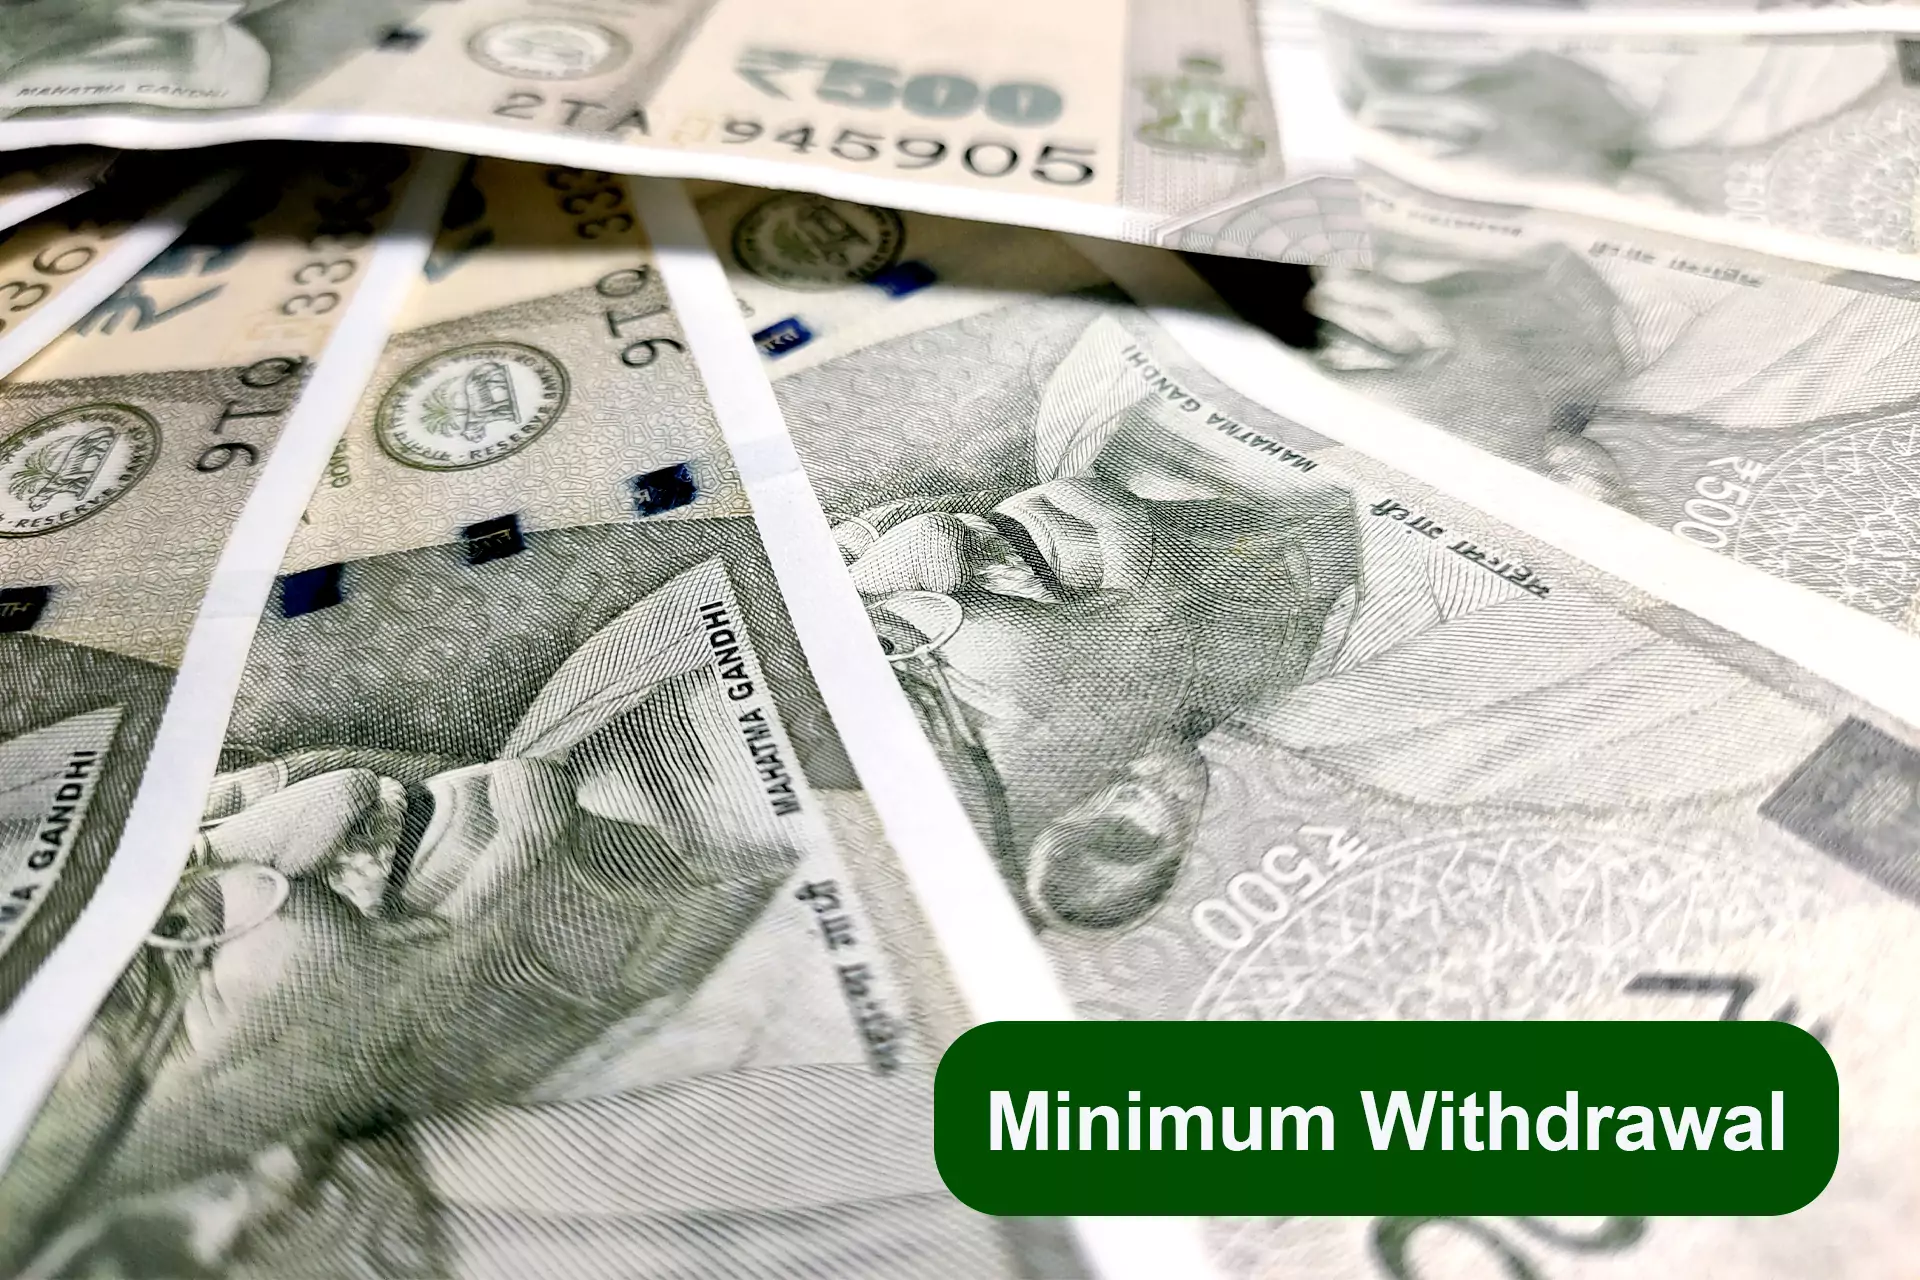 You can withdraw even small sums from your Linebet account.